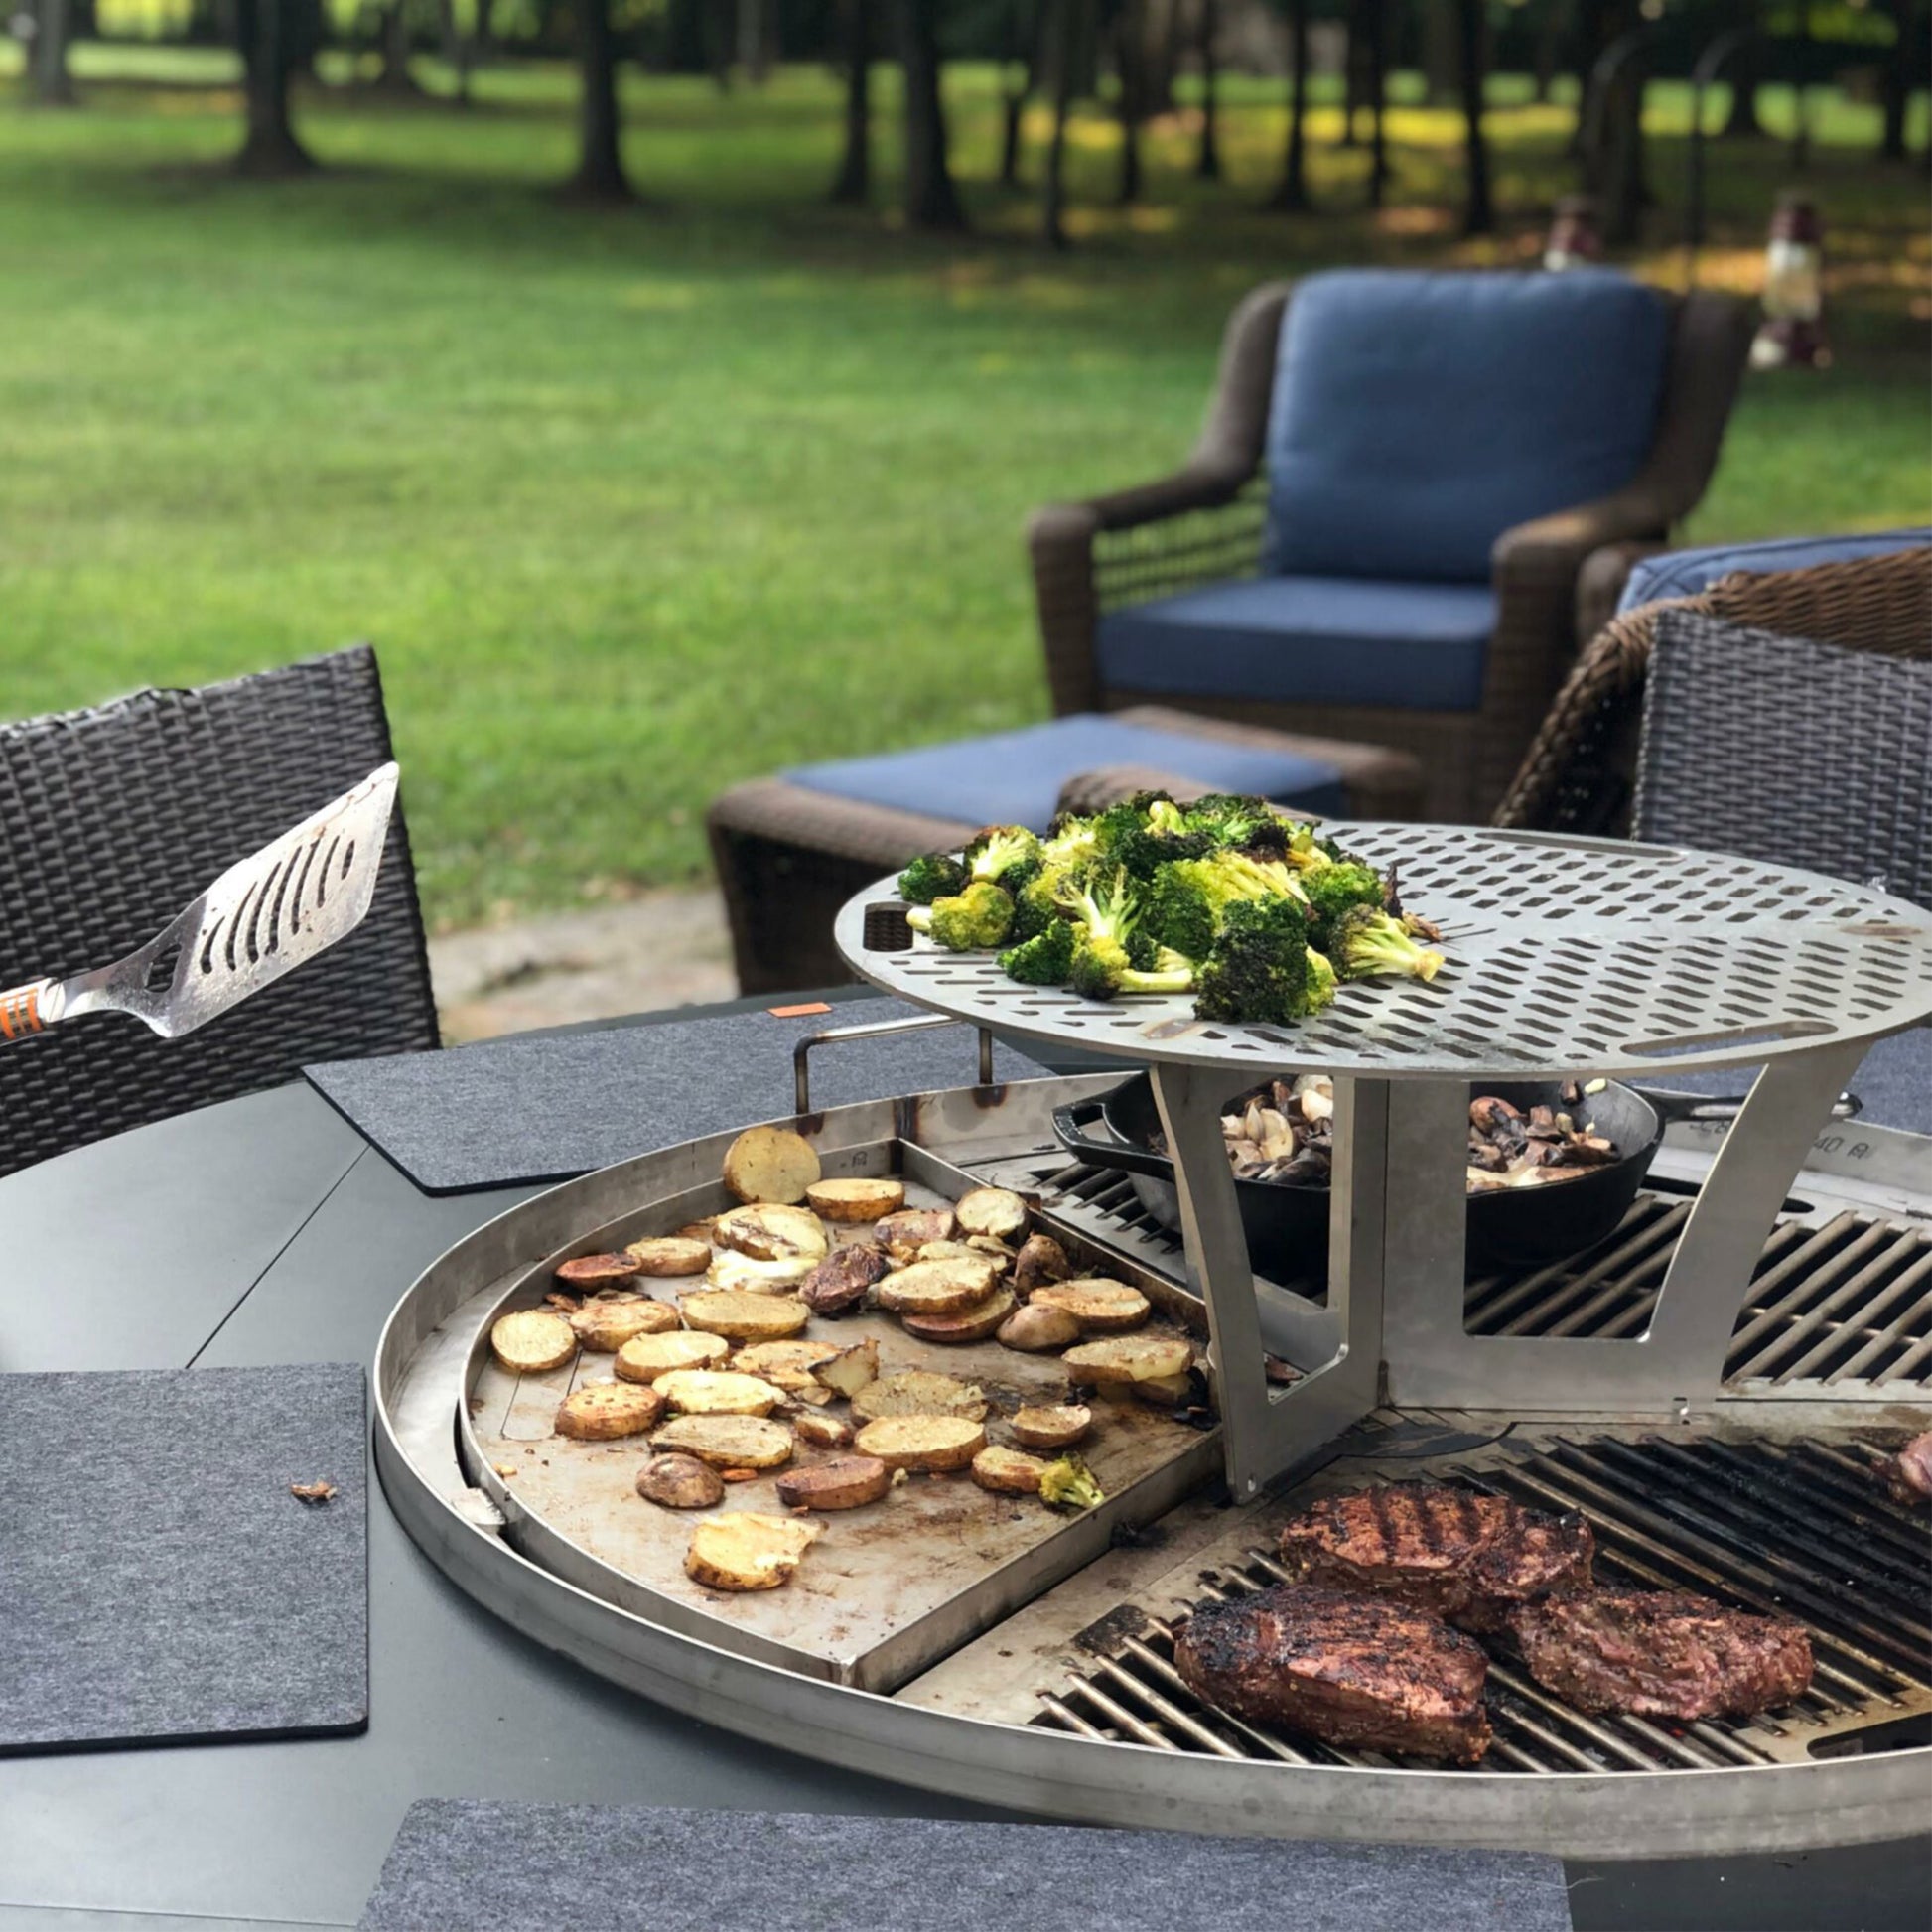 46-inch Reunion Multi-Function Grill and Firepit